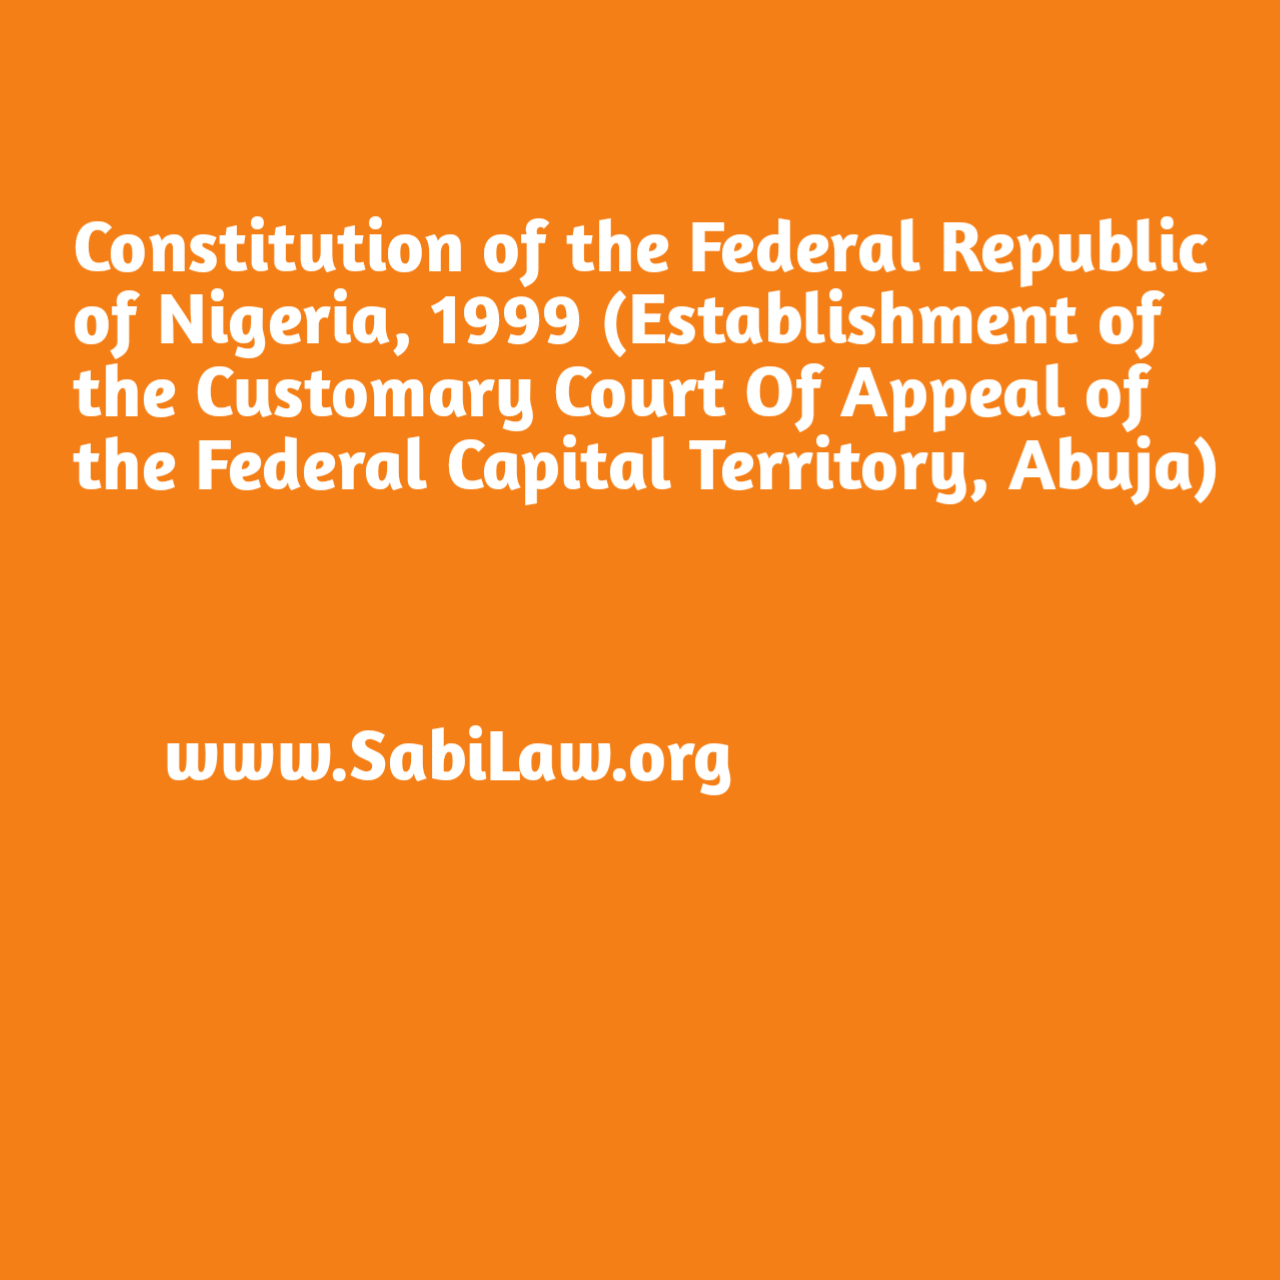 Click to download the Constitution of the Federal Republic of Nigeria, 1999 (Establishment of the Customary Court of Appeal of the Federal Capital Territory, Abuja)